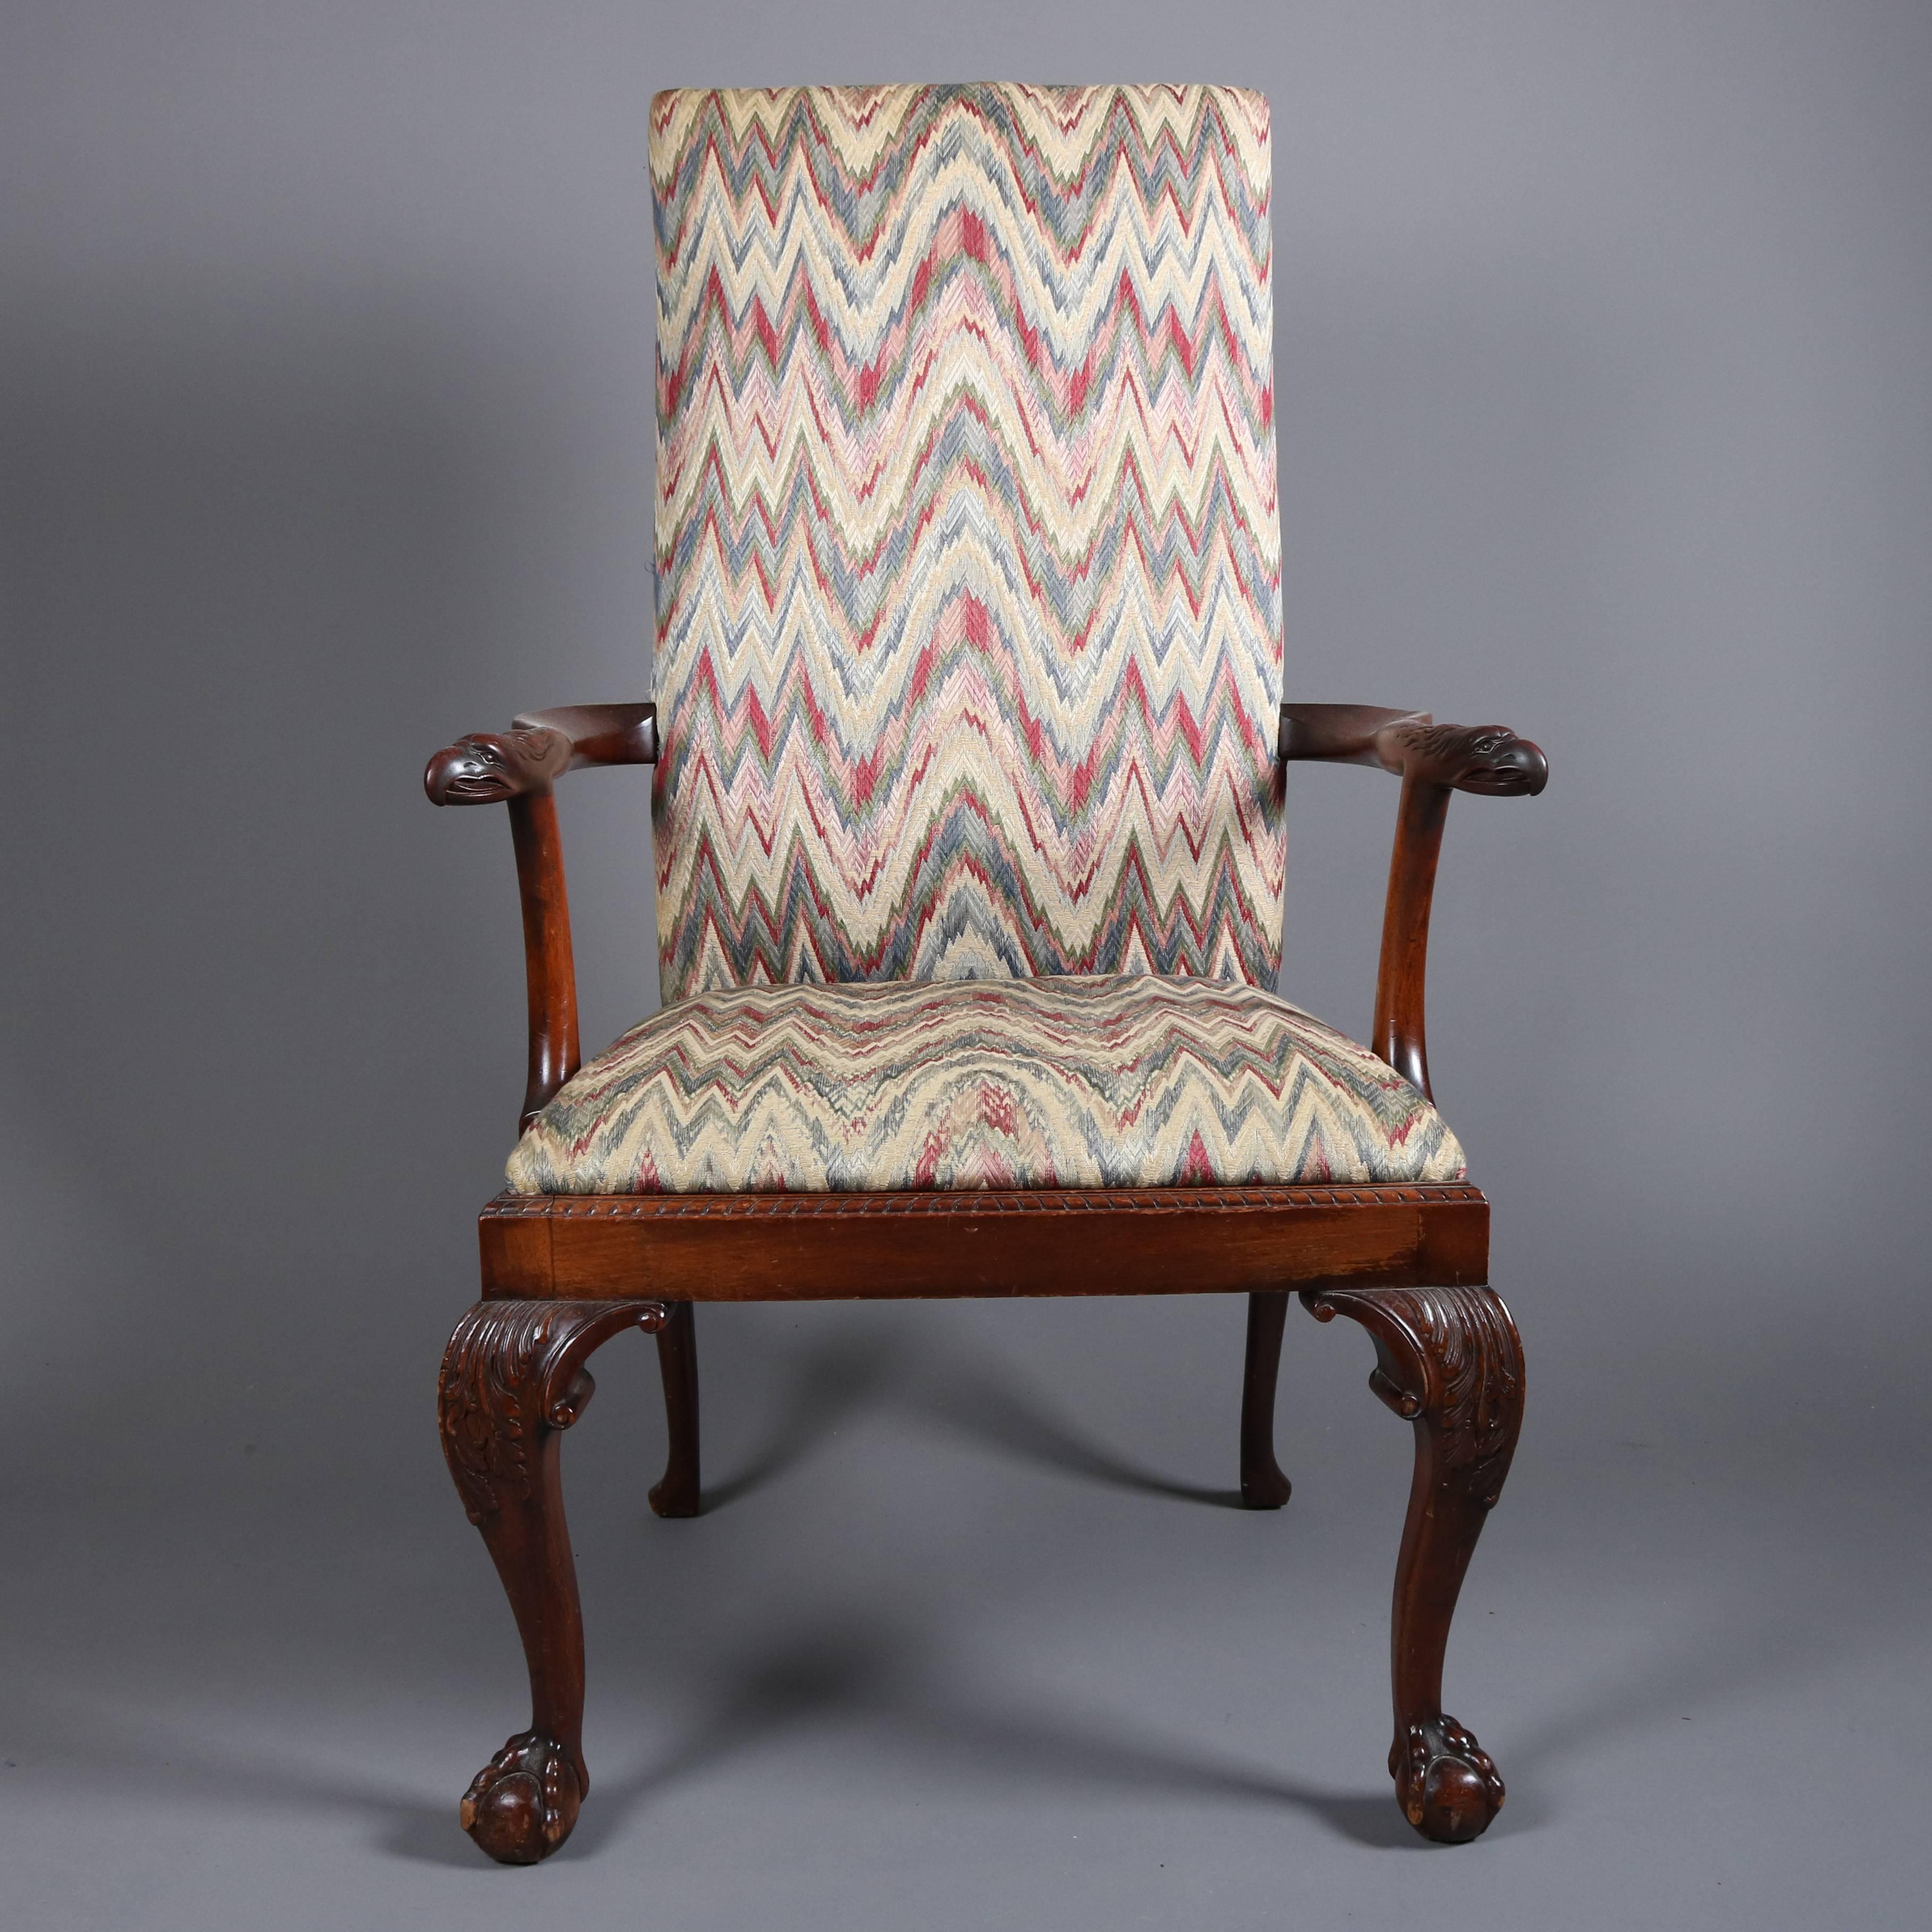 Antique mahogany figural Chippendale lolling armchair features carved falcon arms and claw and ball feet, flame stitch upholstered seat and back, 19th century

Measures: 48" H x 27.5" W x 22" D, 18" seat H.